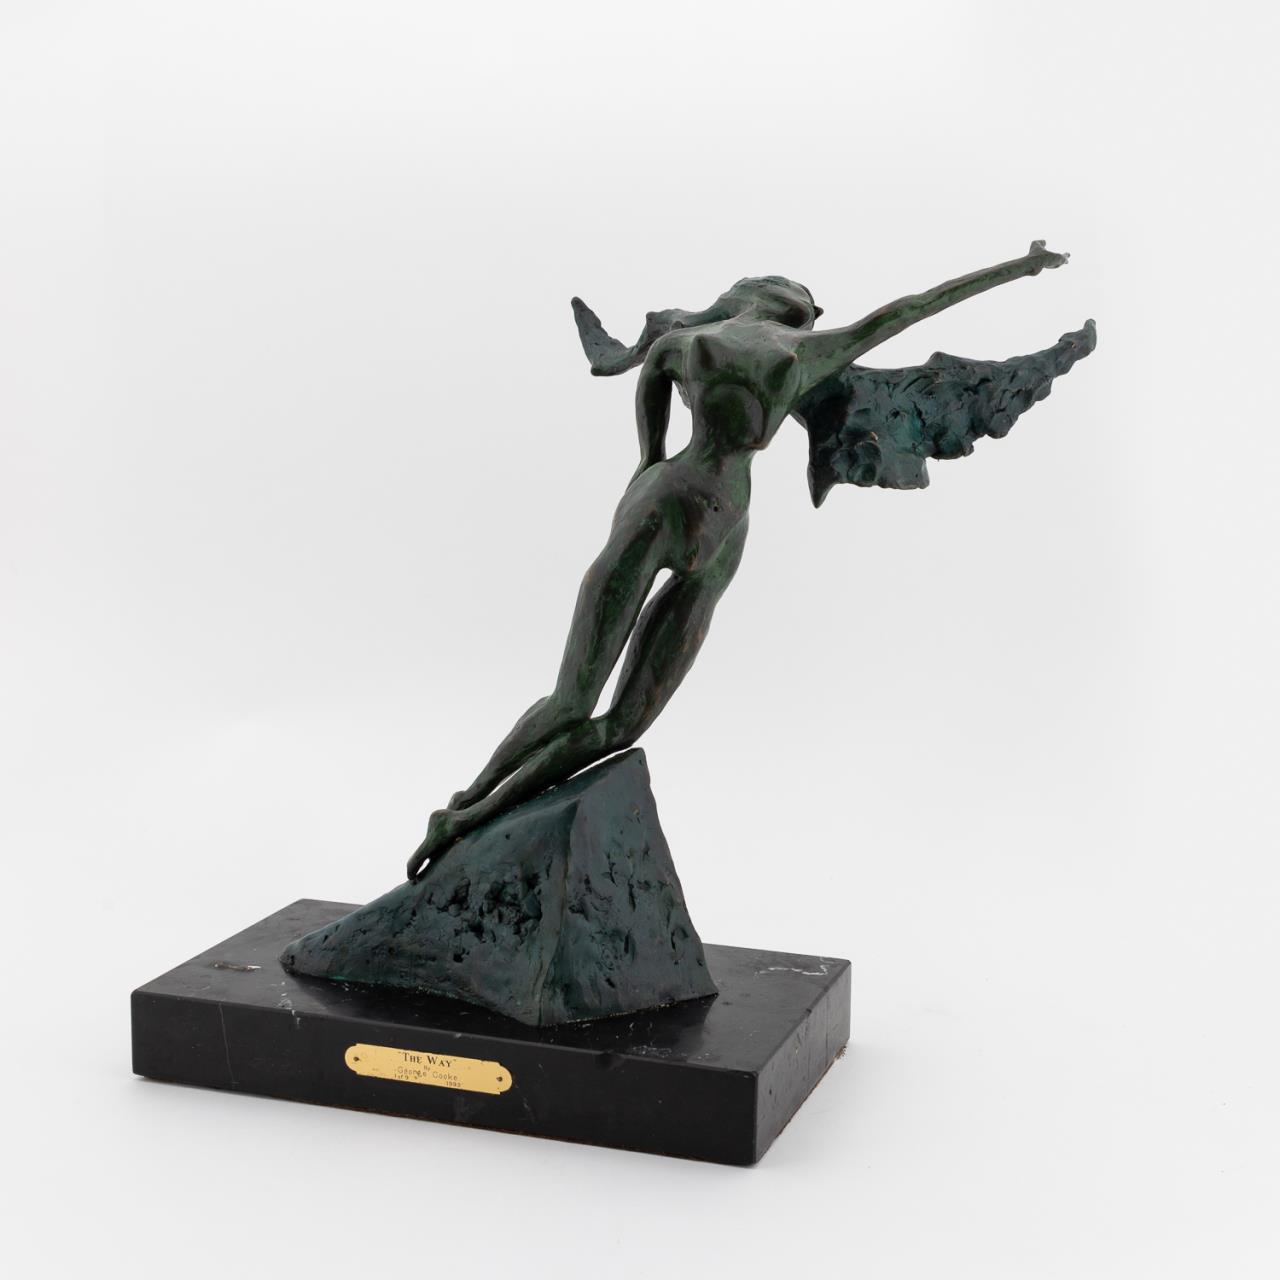 GEORGE COOKE THE WAY BRONZE FIGURAL 35a598